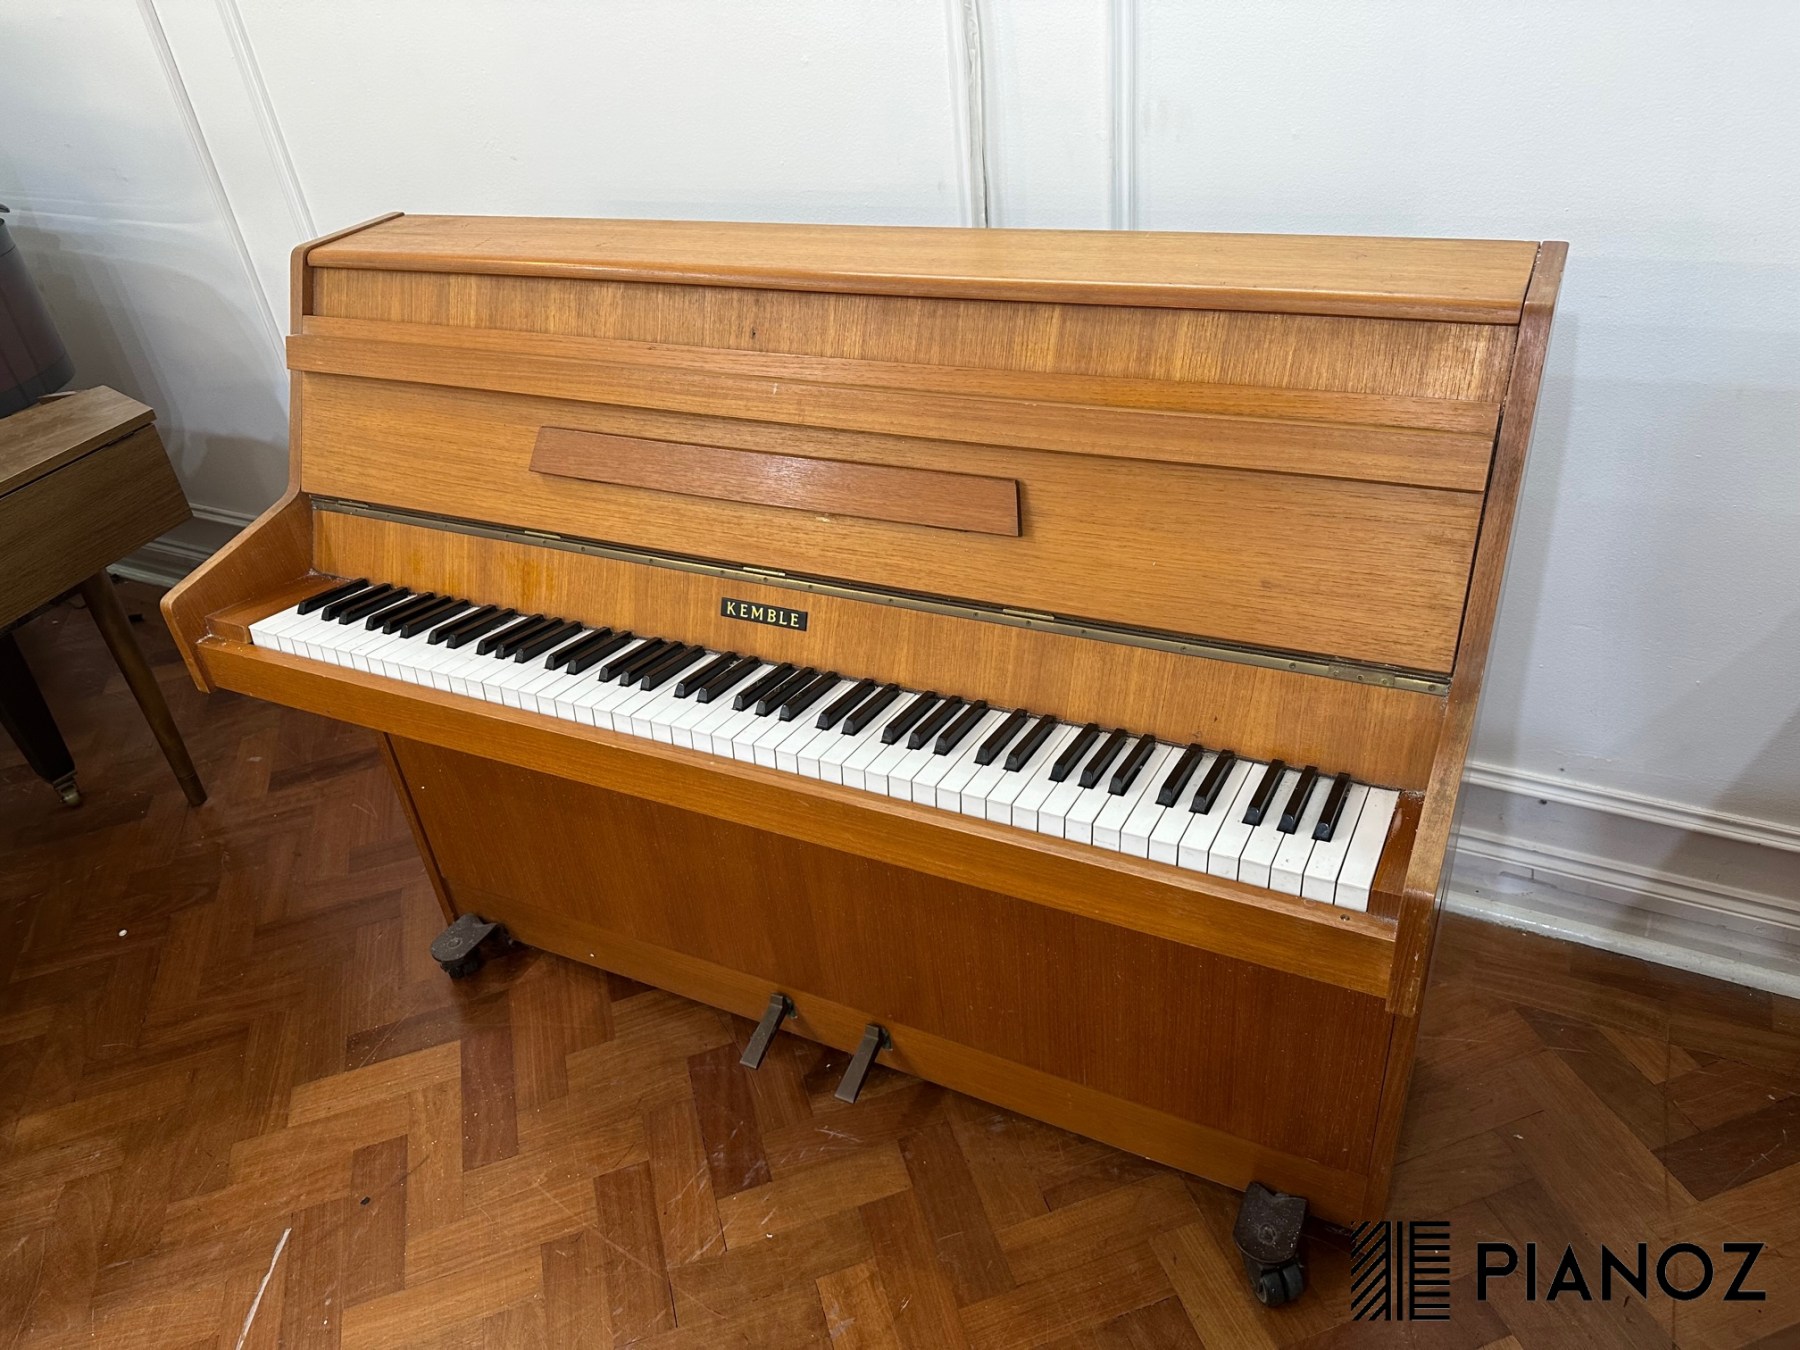 Kemble Compact Upright Piano piano for sale in UK